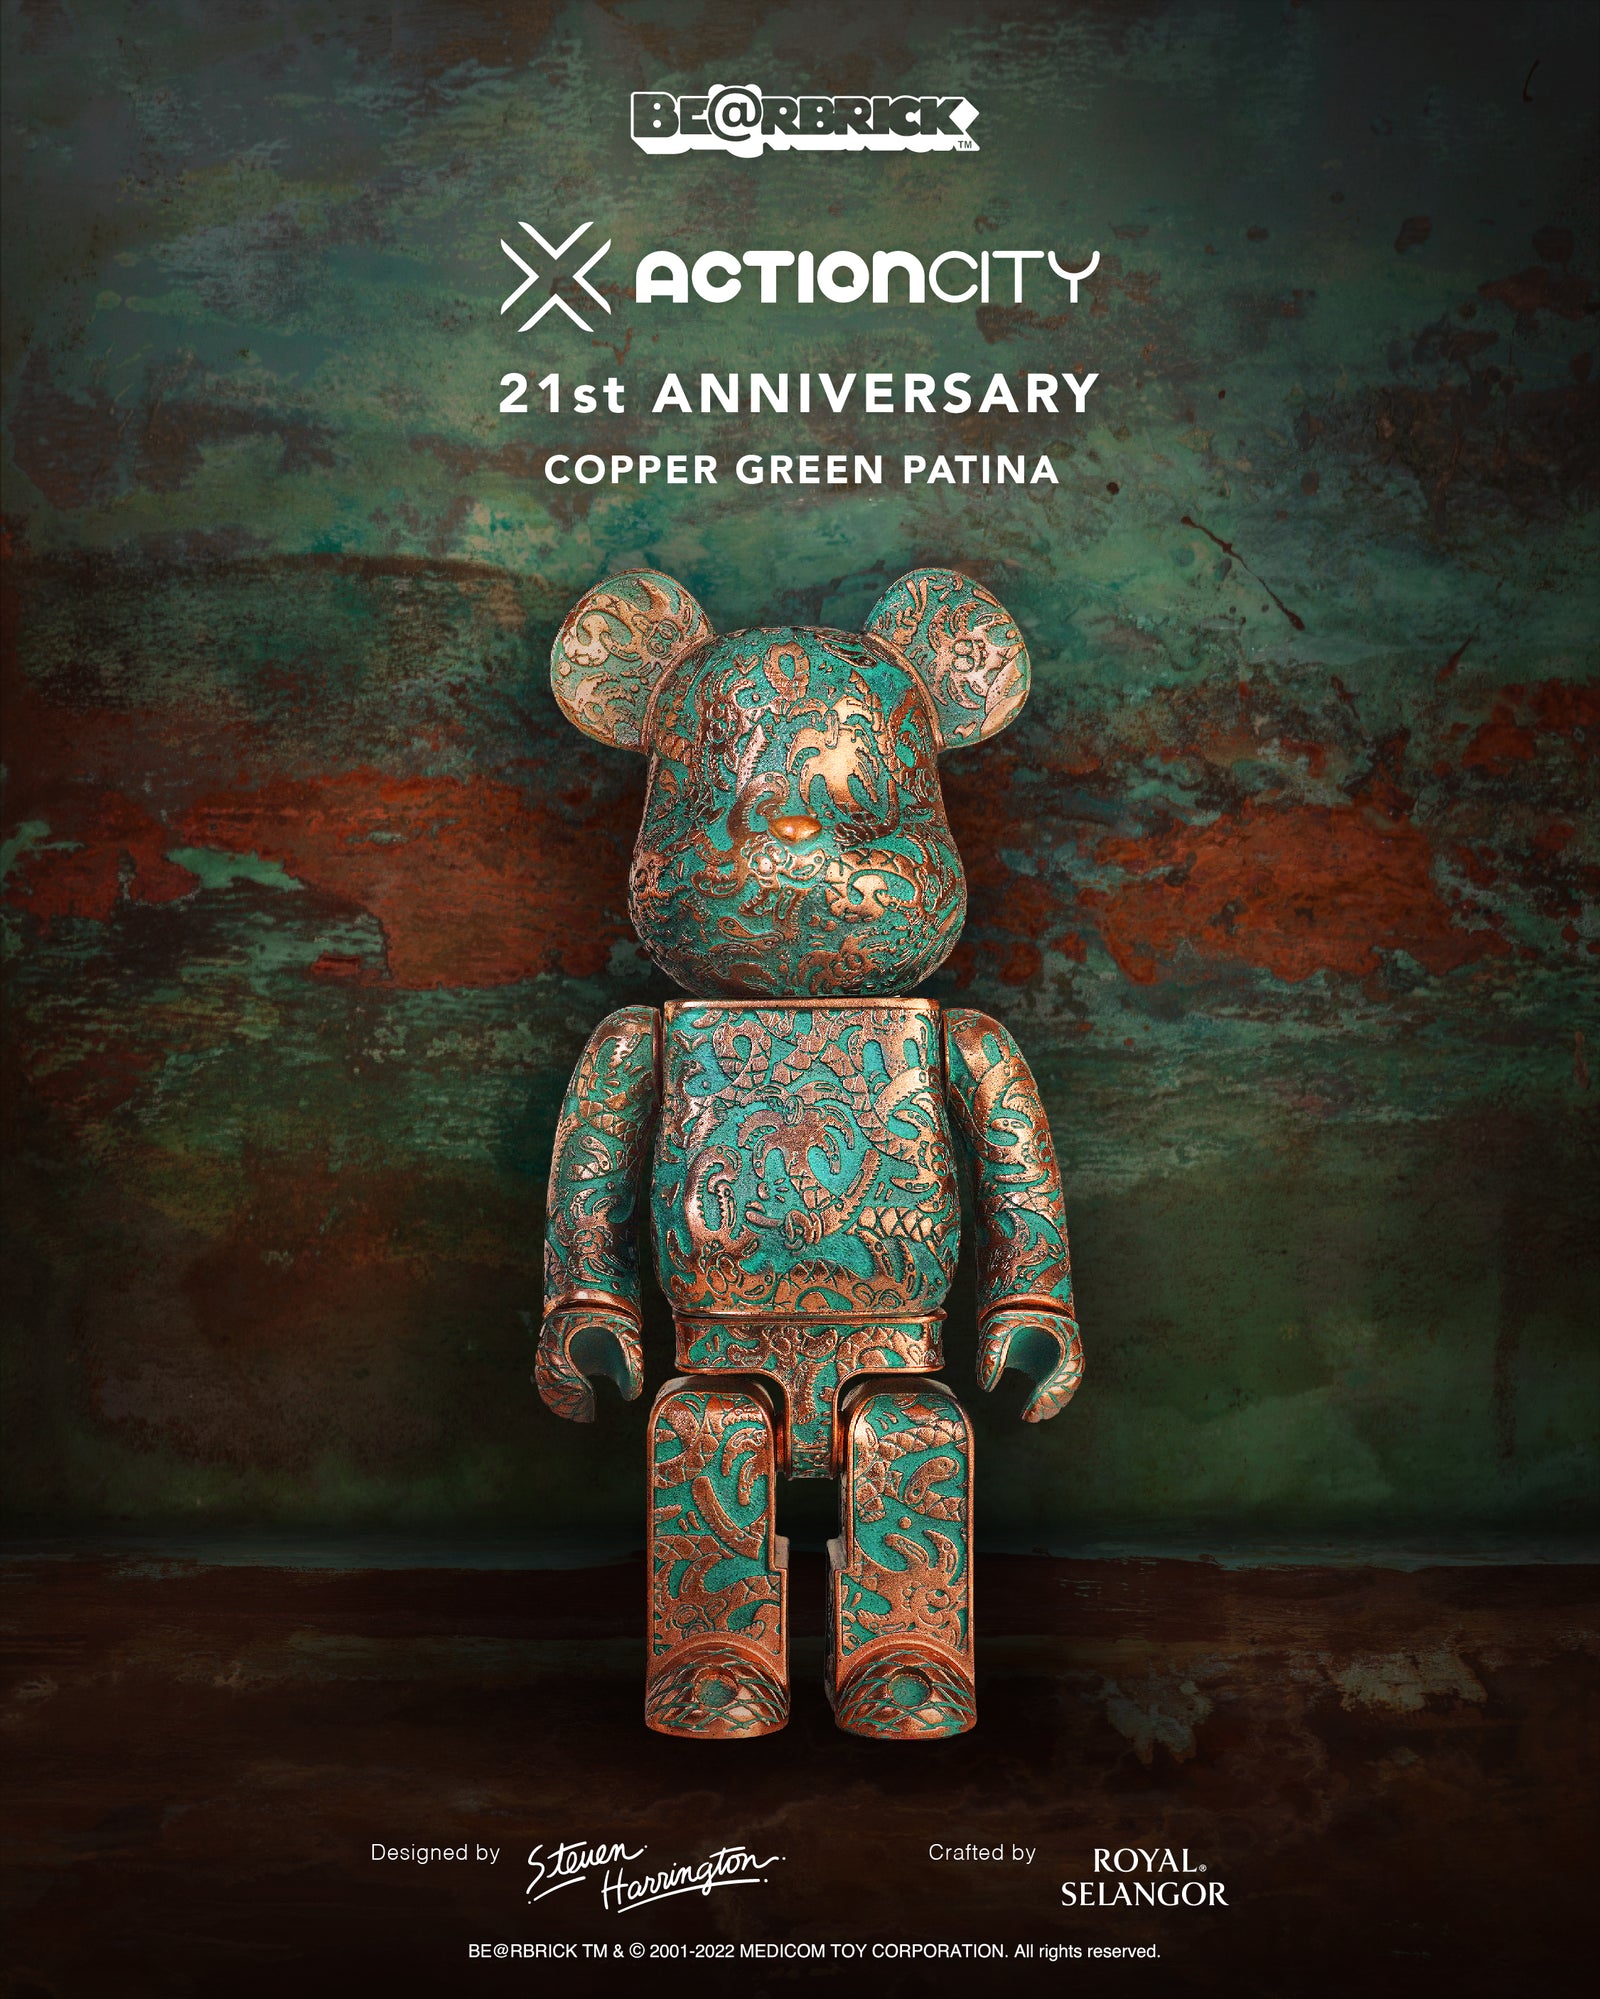 400% BE@RBRICK ACTIONCITY 21ST ANNIVERSARY COPPER GREEN PATINA